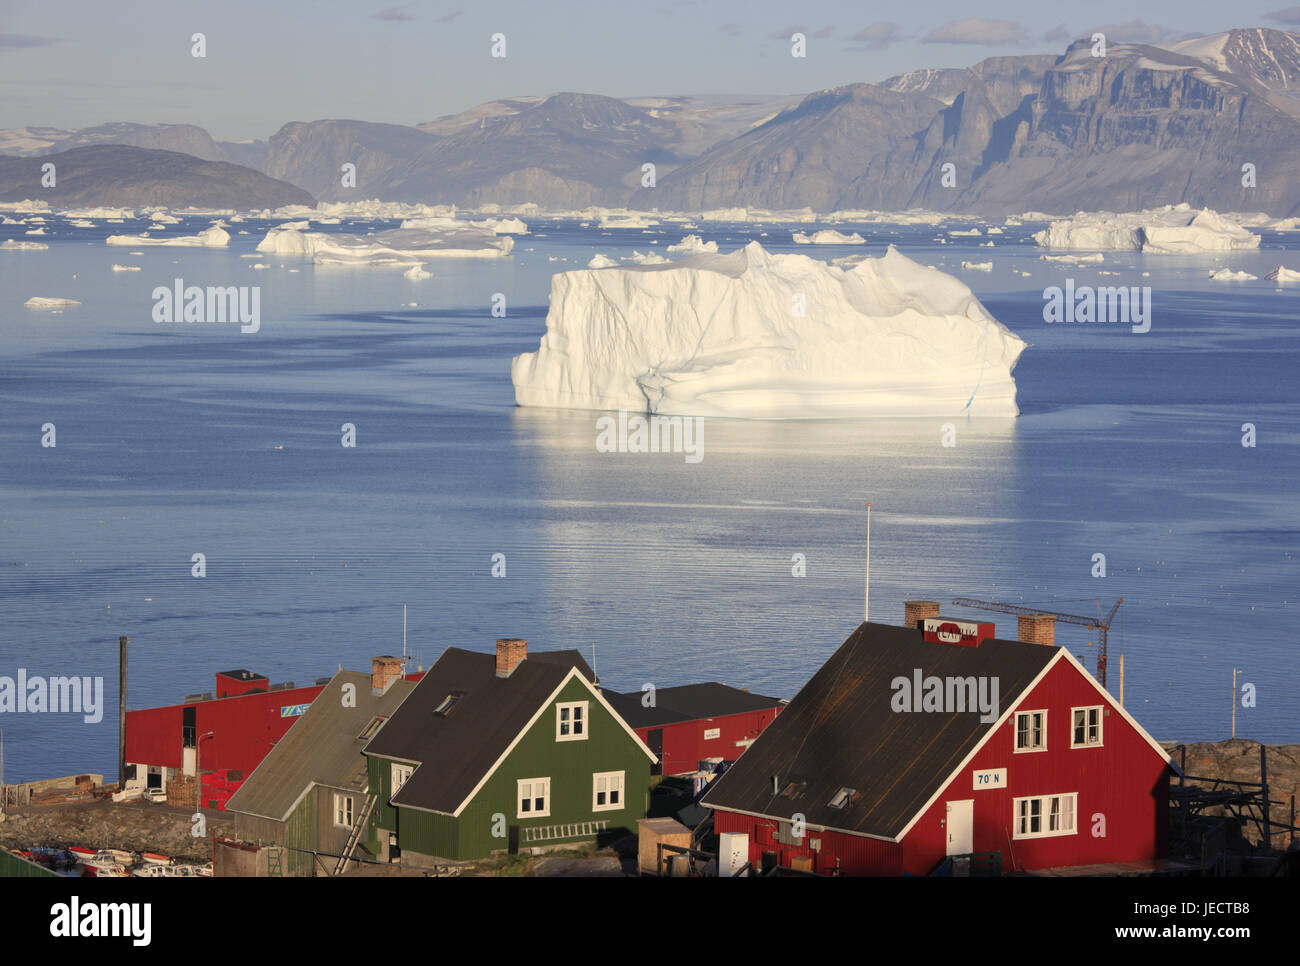 Greenland, Uummannaq, coast, timber houses, fjord, icebergs, Northern Greenland, destination, sea, the Arctic, mountains, glacier ice creams, outside, E sharp, water, houses, residential houses, architecture, outside, deserted, view, Stock Photo